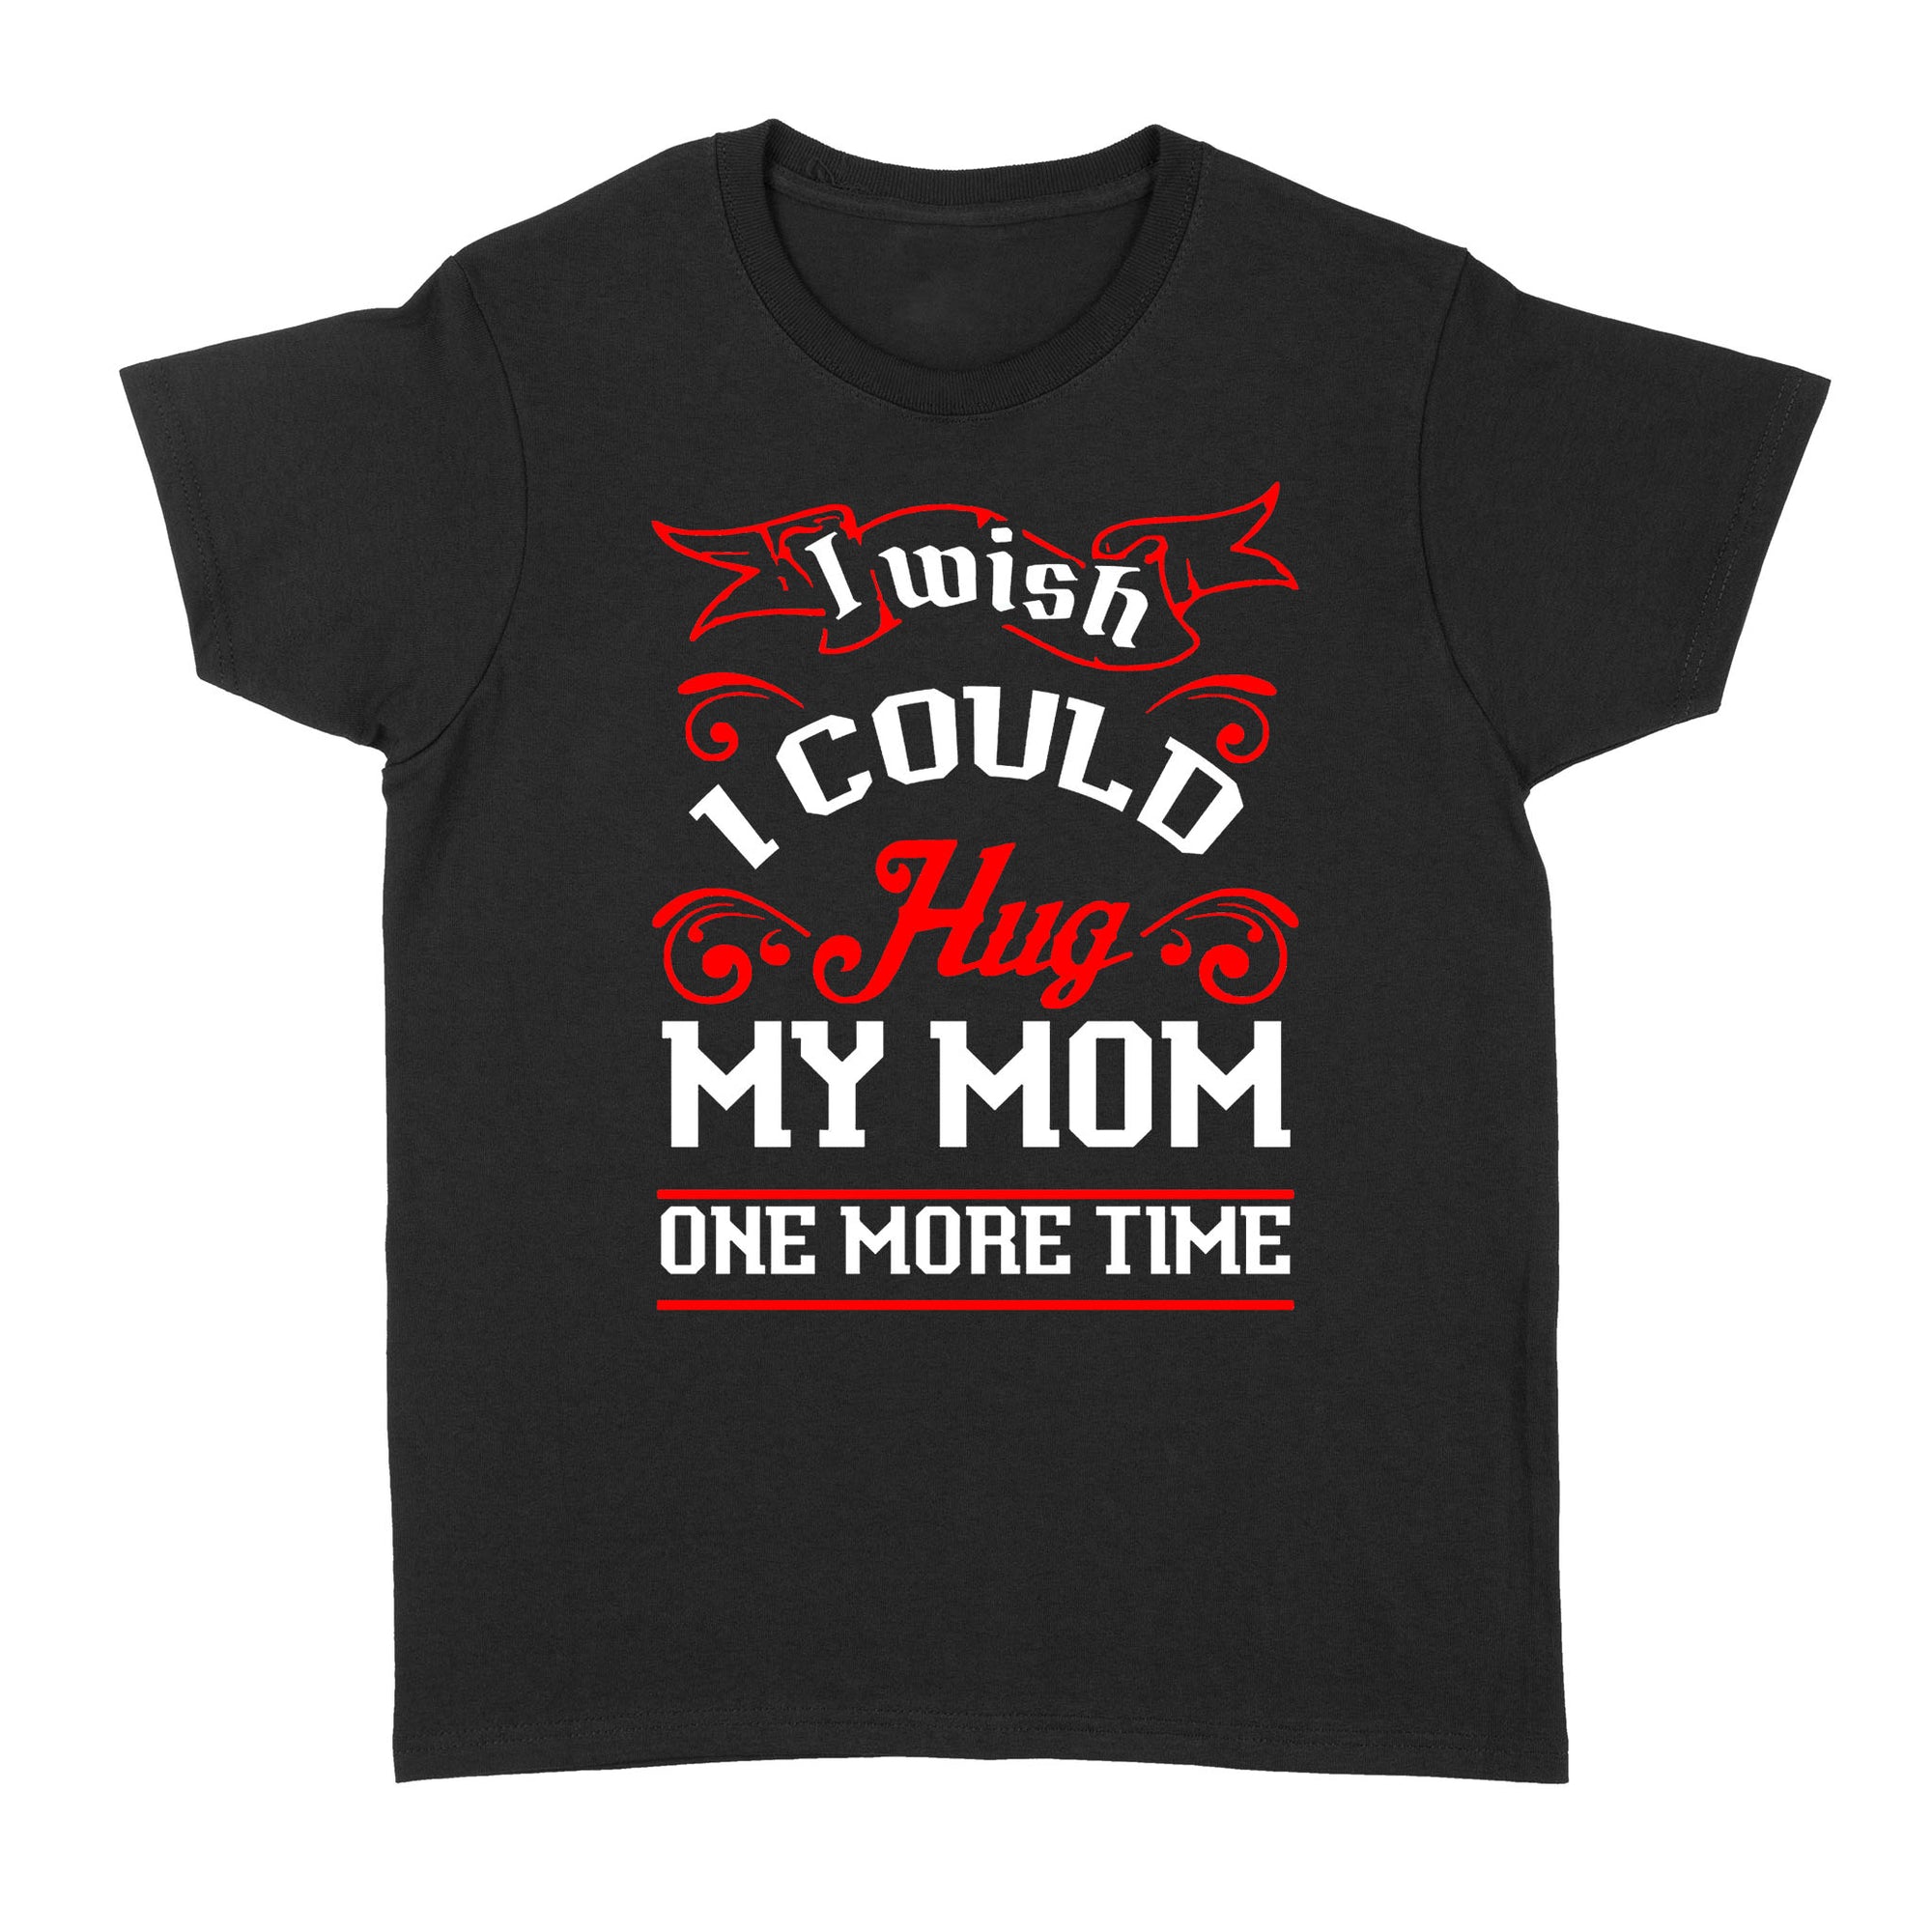 Gift Ideas for Daughter I Wish I Could Hug My Mom One More Time B - Standard Women's T-shirt